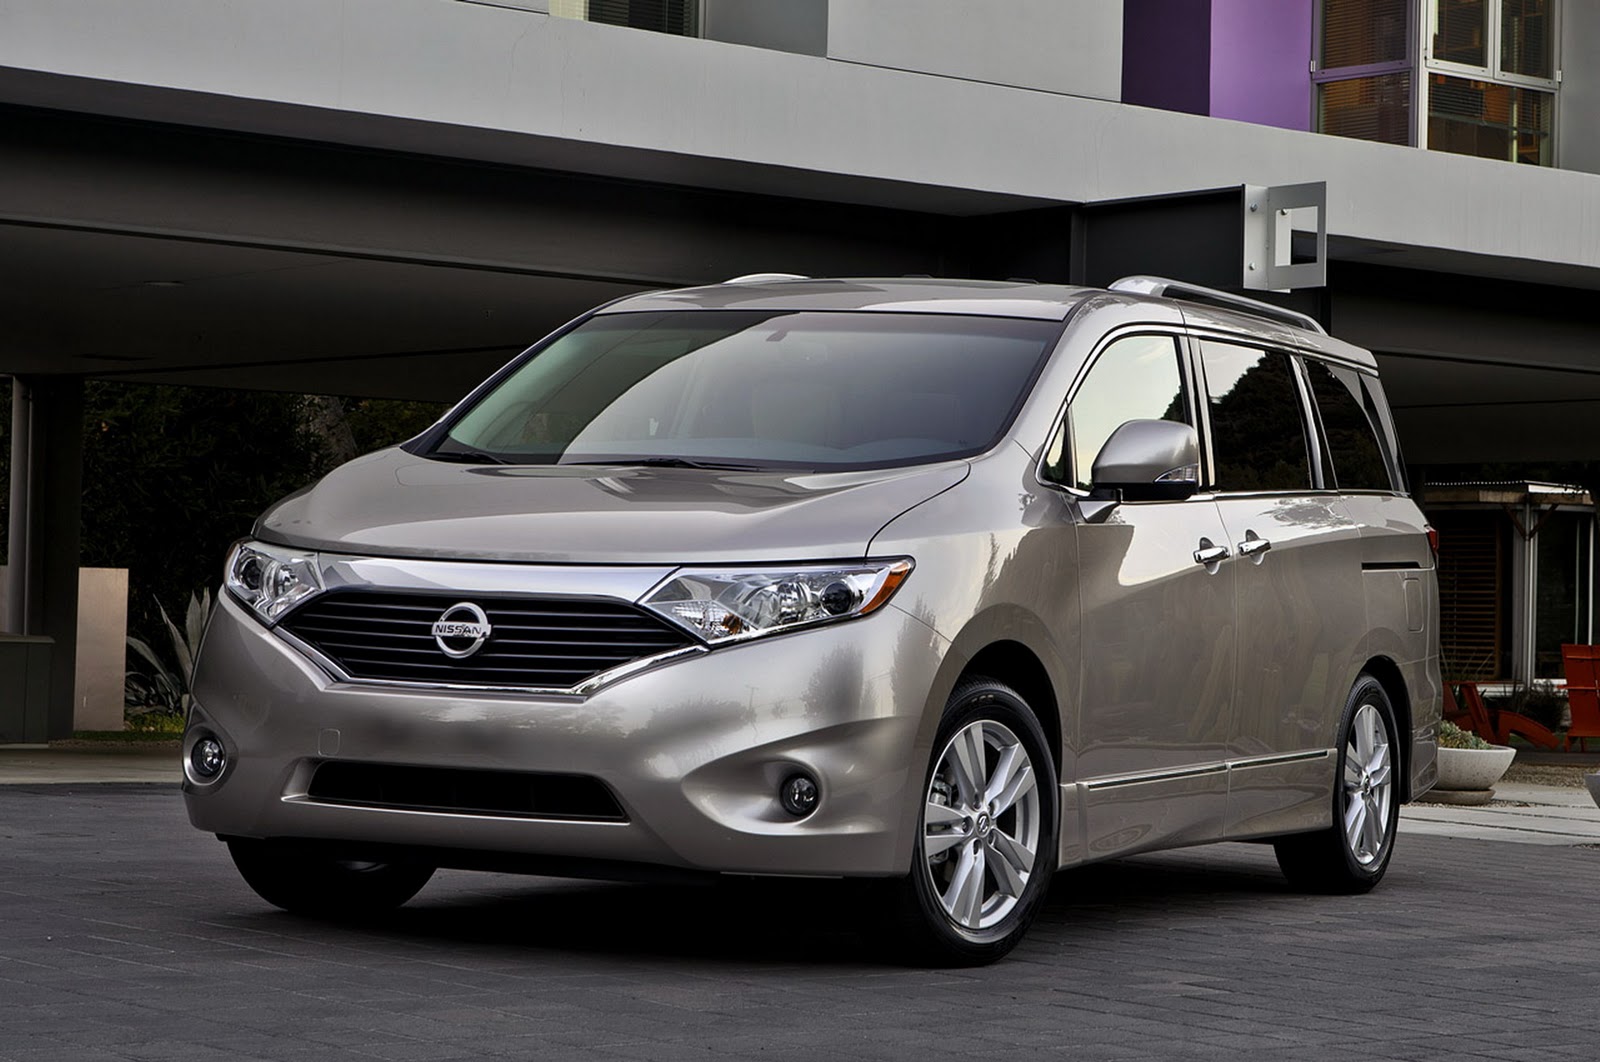 Nissan Quest or similar